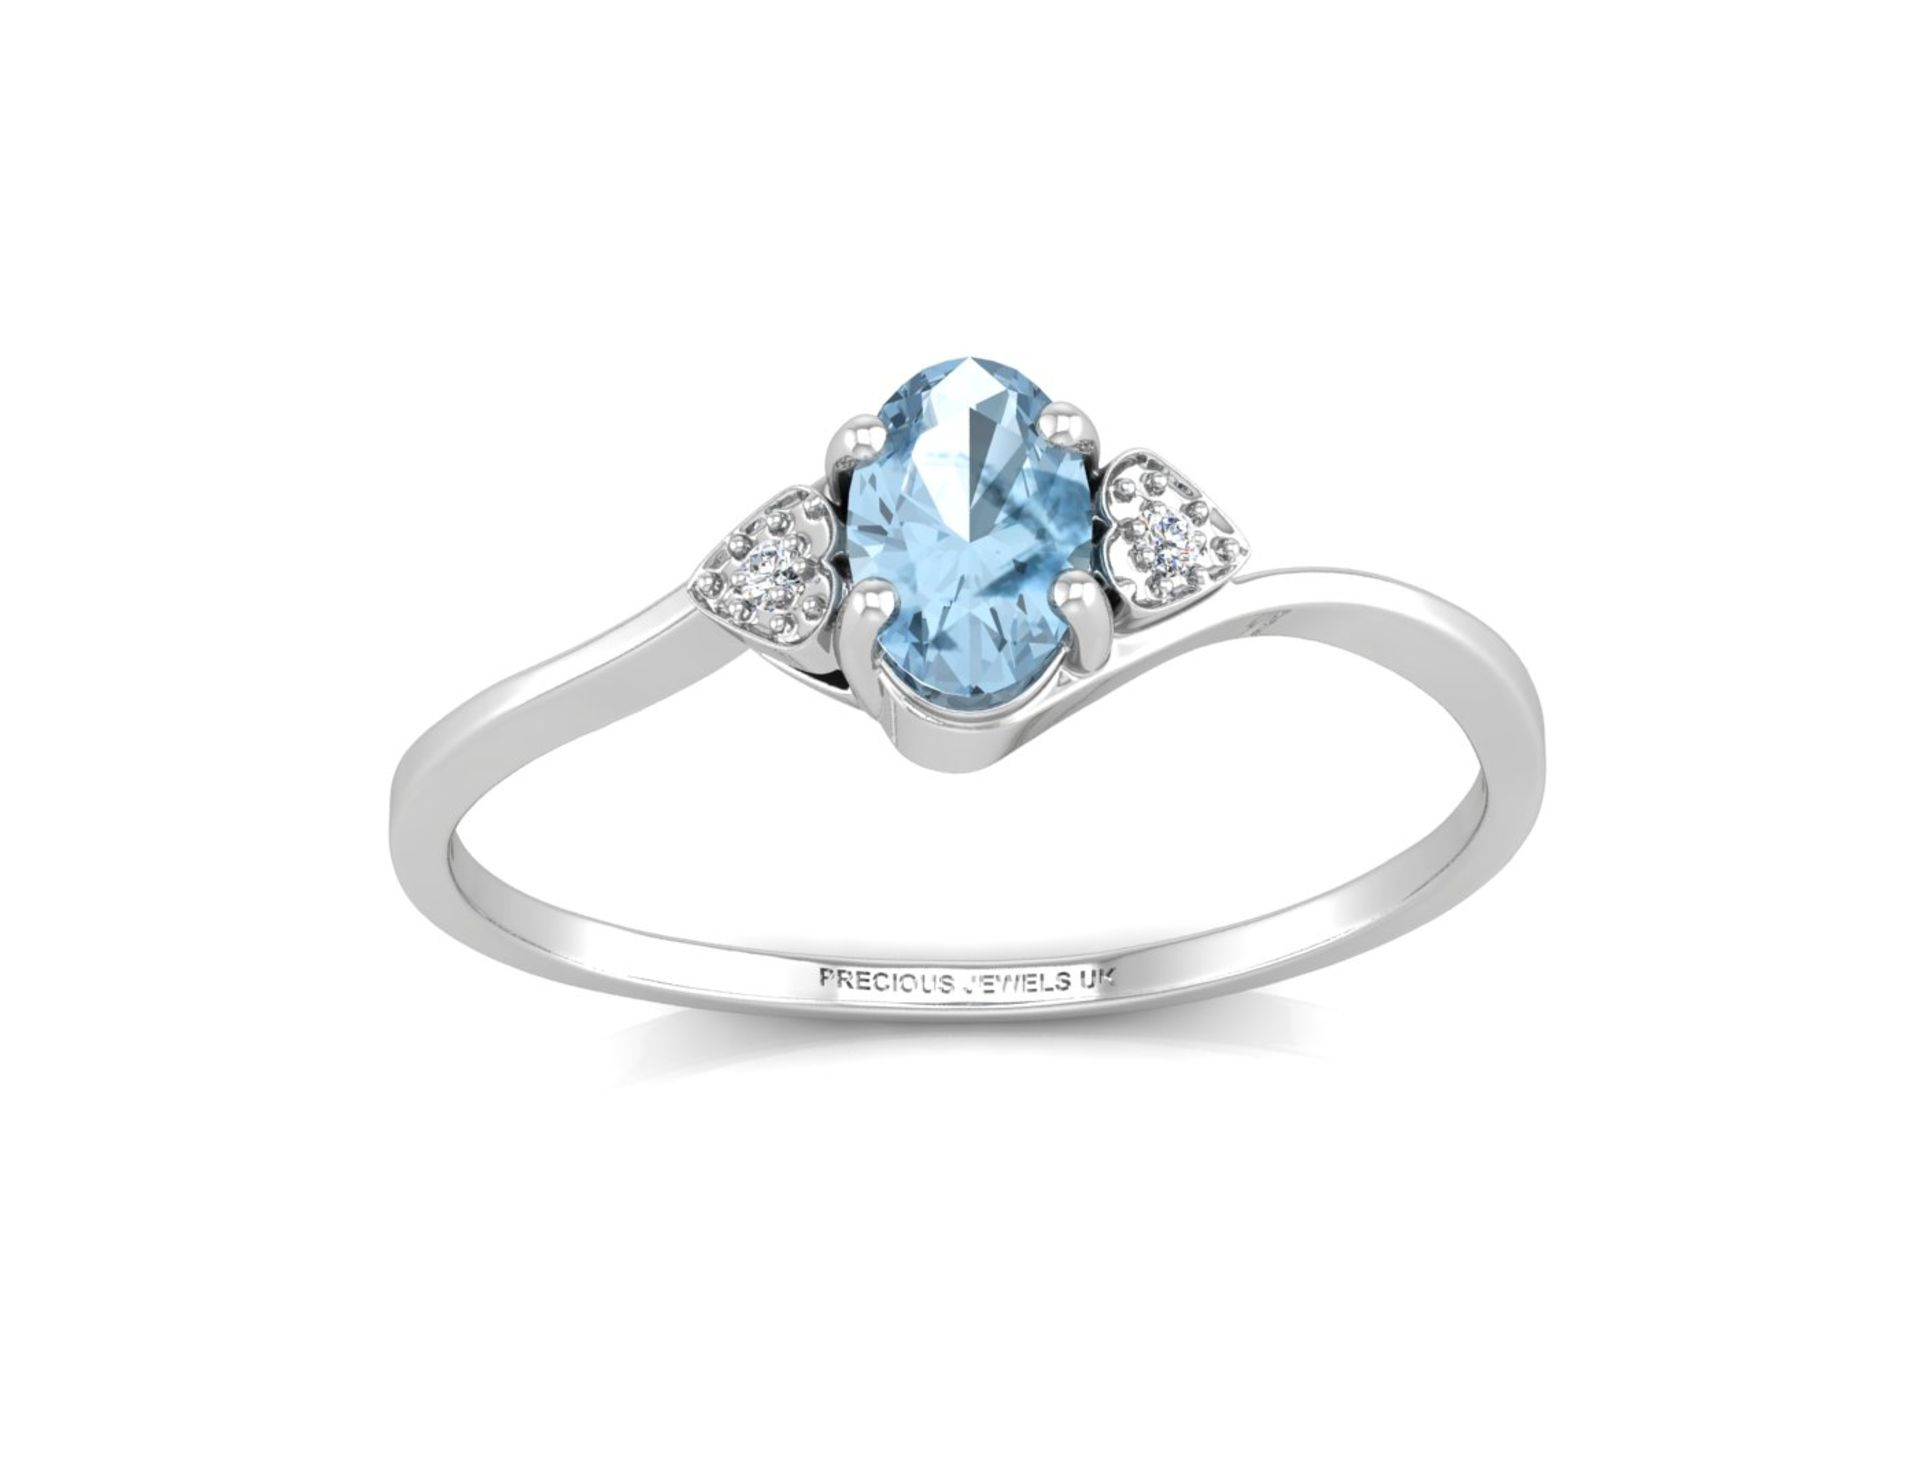 9ct White Gold Fancy Cluster Diamond Blue Topaz Ring 0.01 Carats - Valued by GIE £860.00 - 9ct White - Image 3 of 6